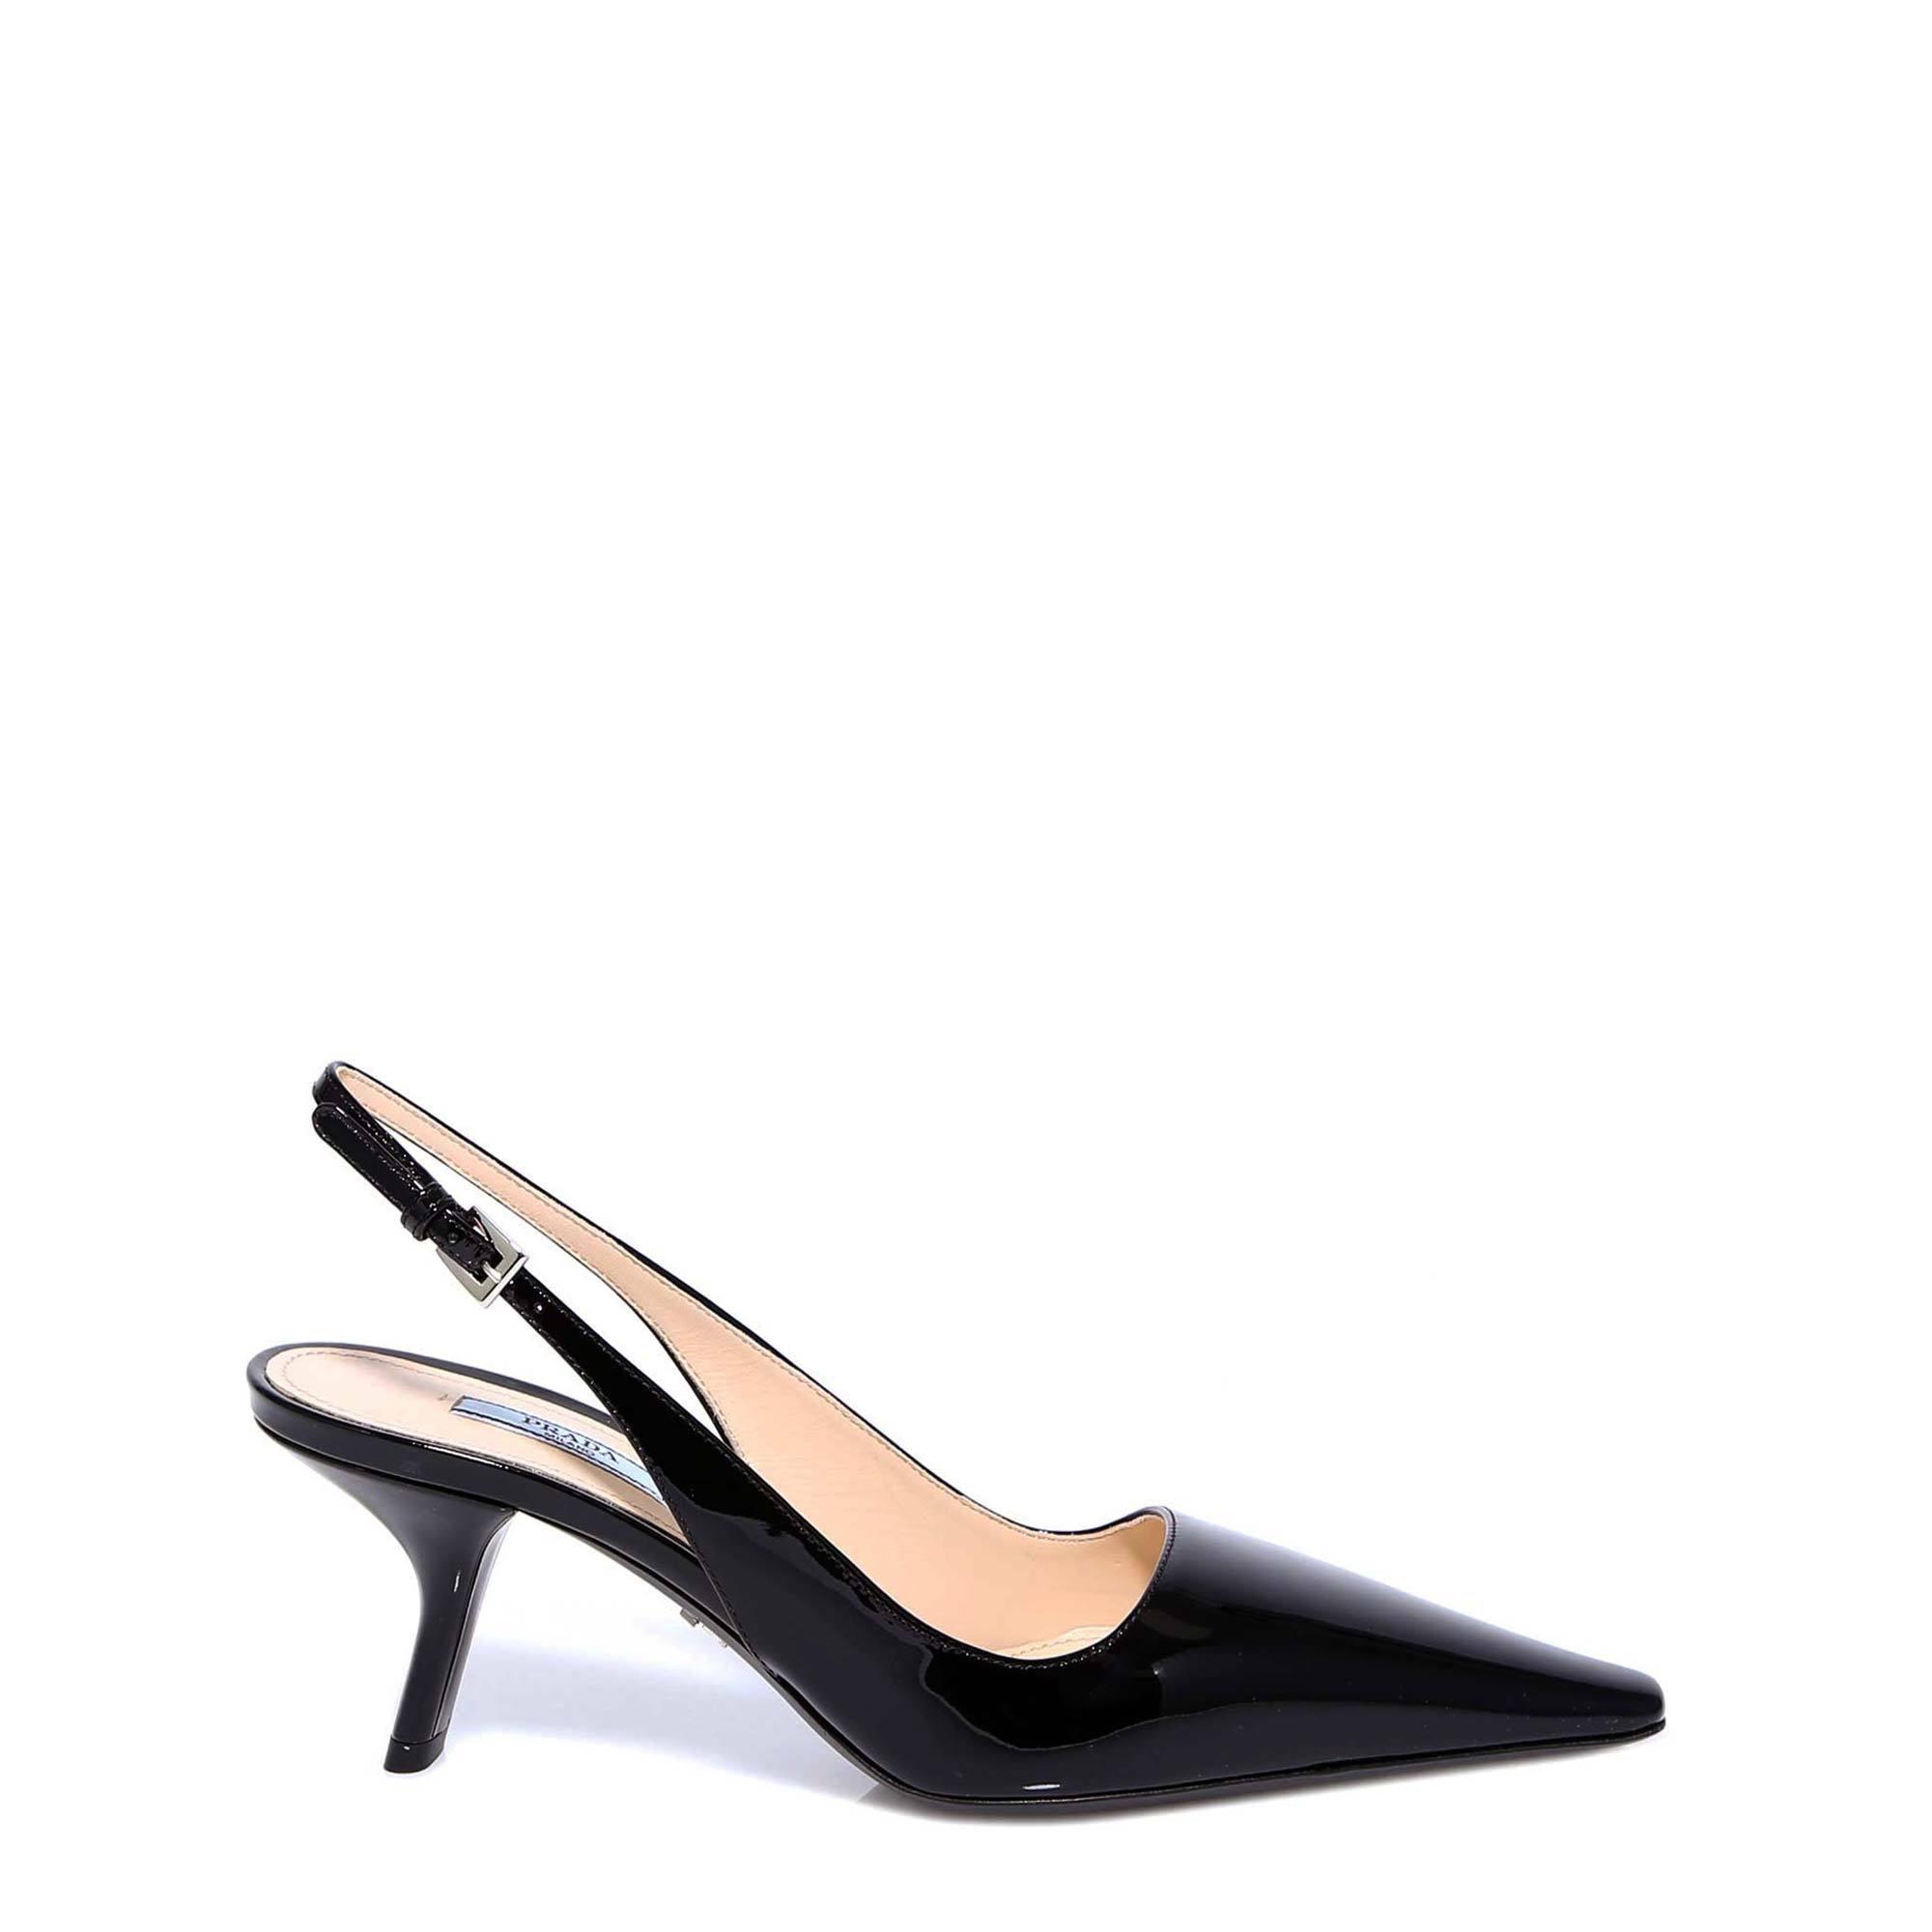 Prada Leather Pointed Toe Slingback Pumps in Black - Lyst